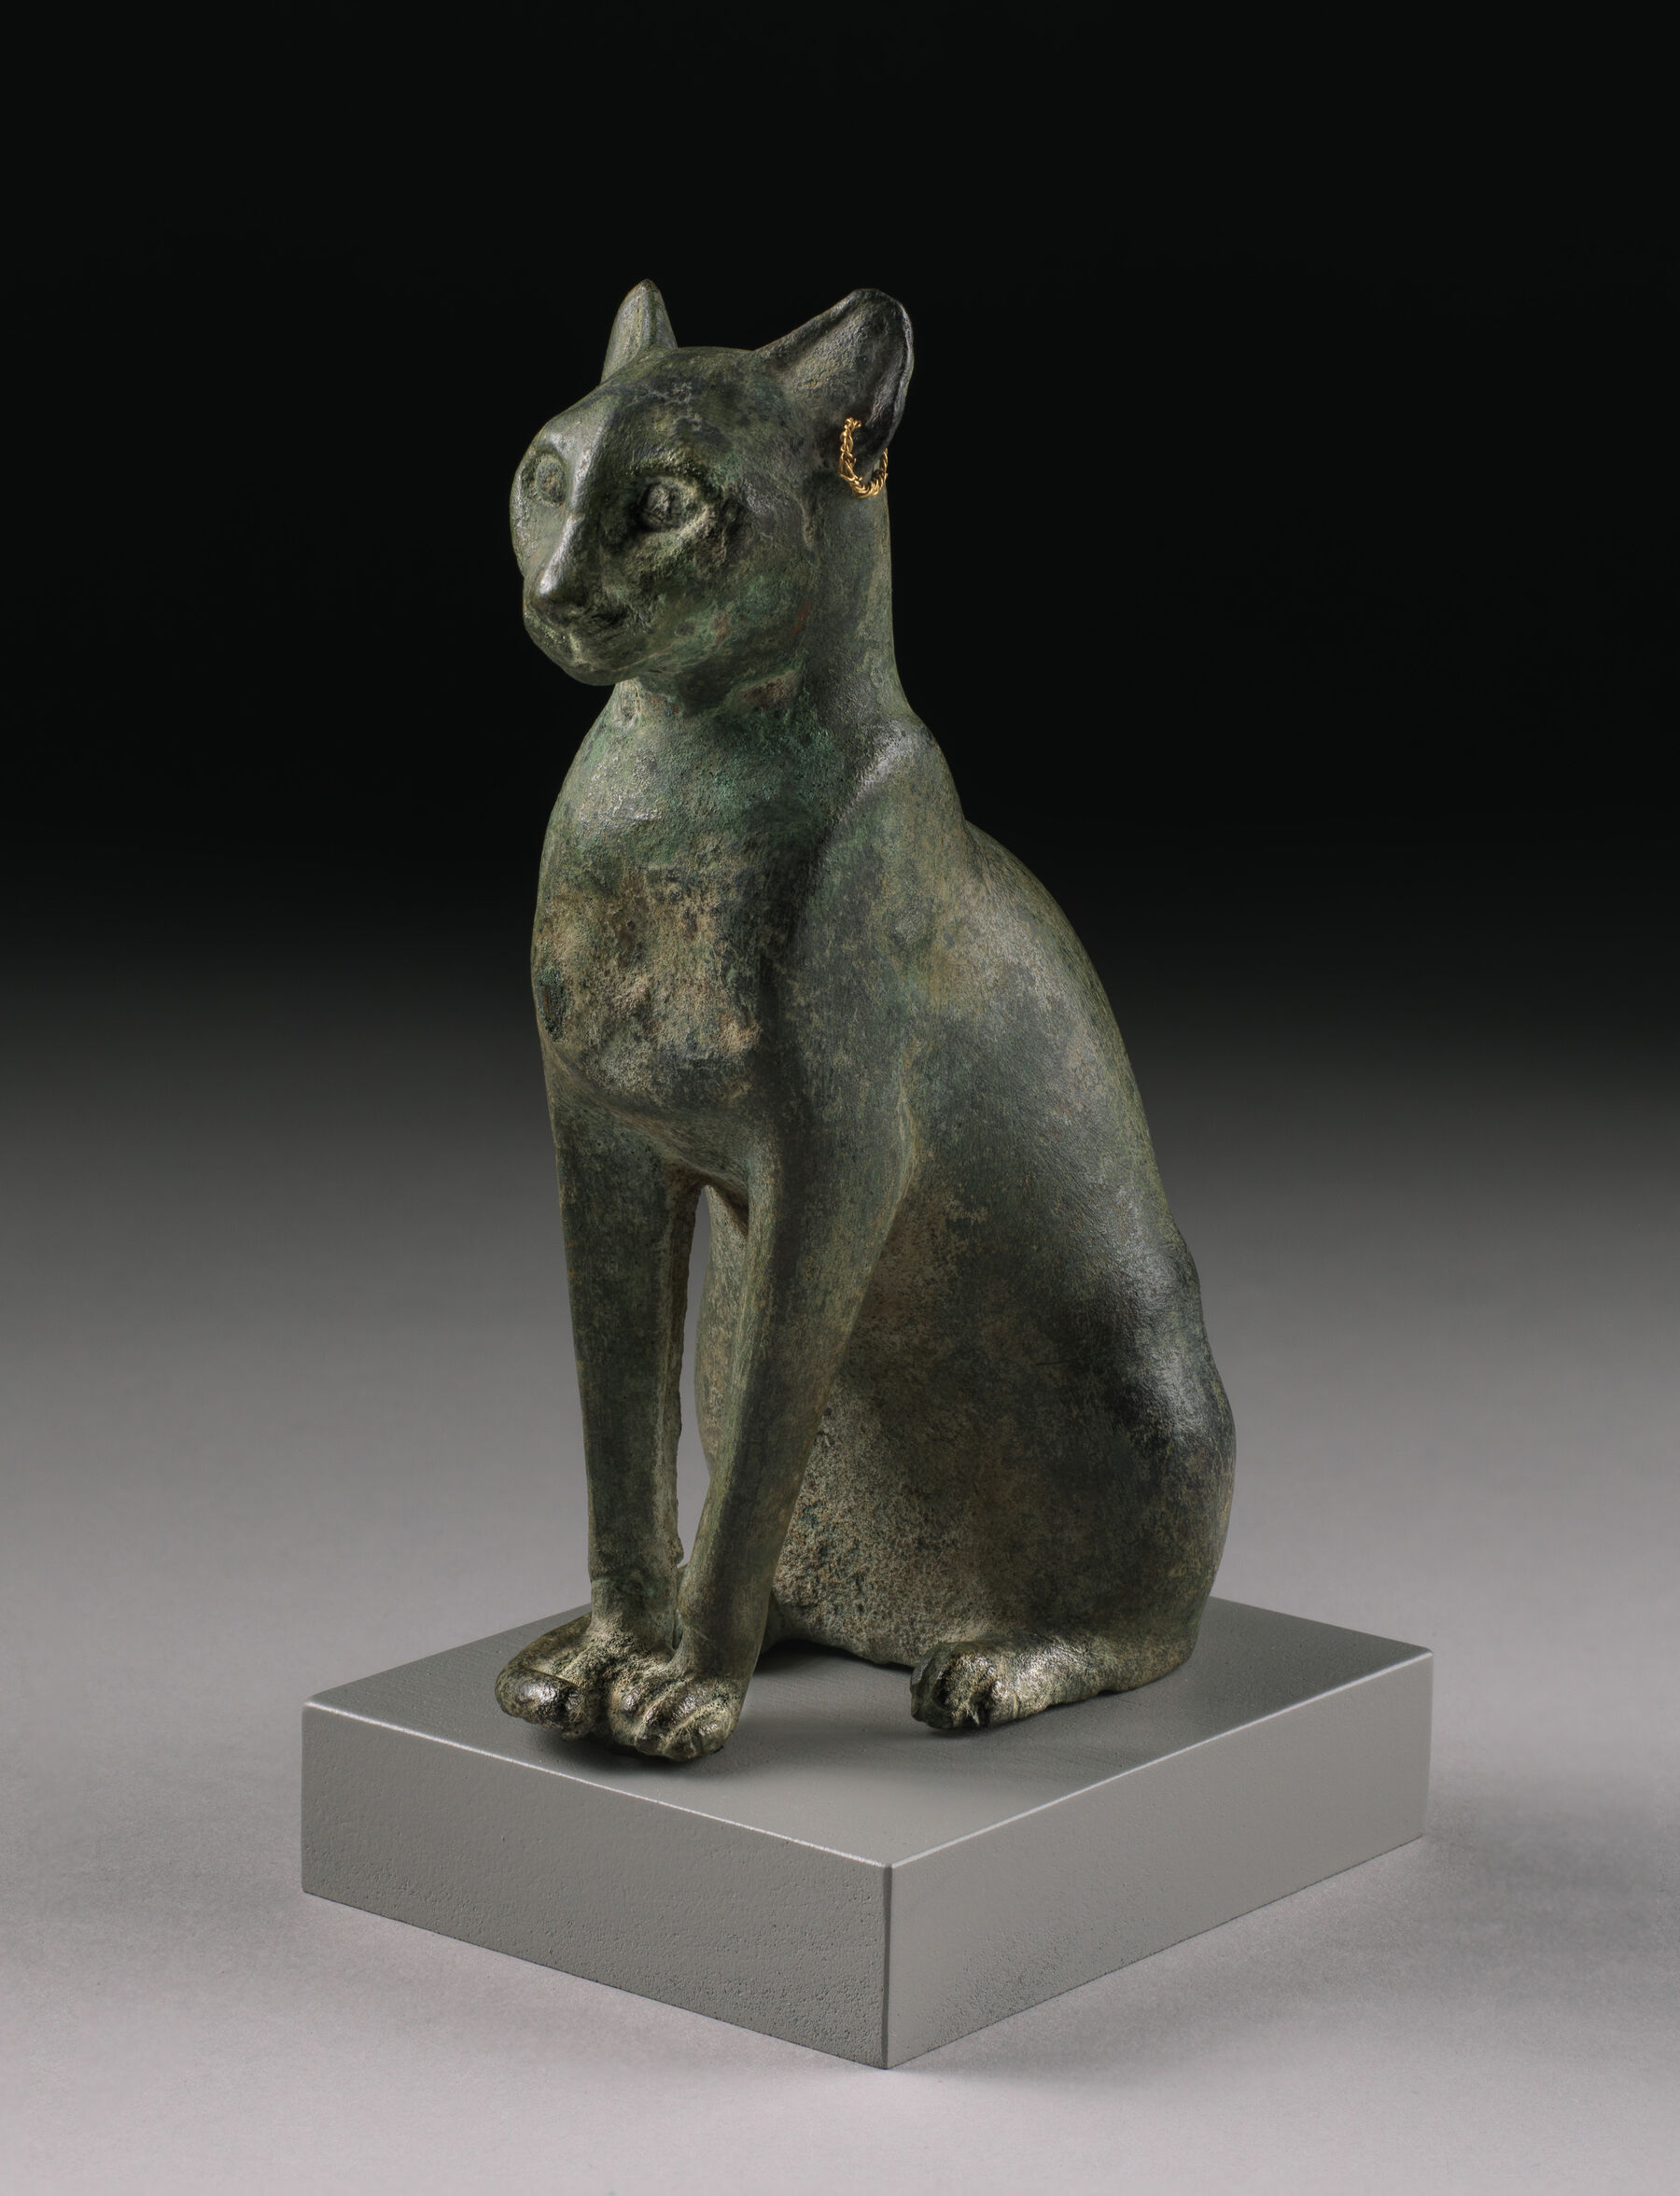 Statuette of a Seated Cat